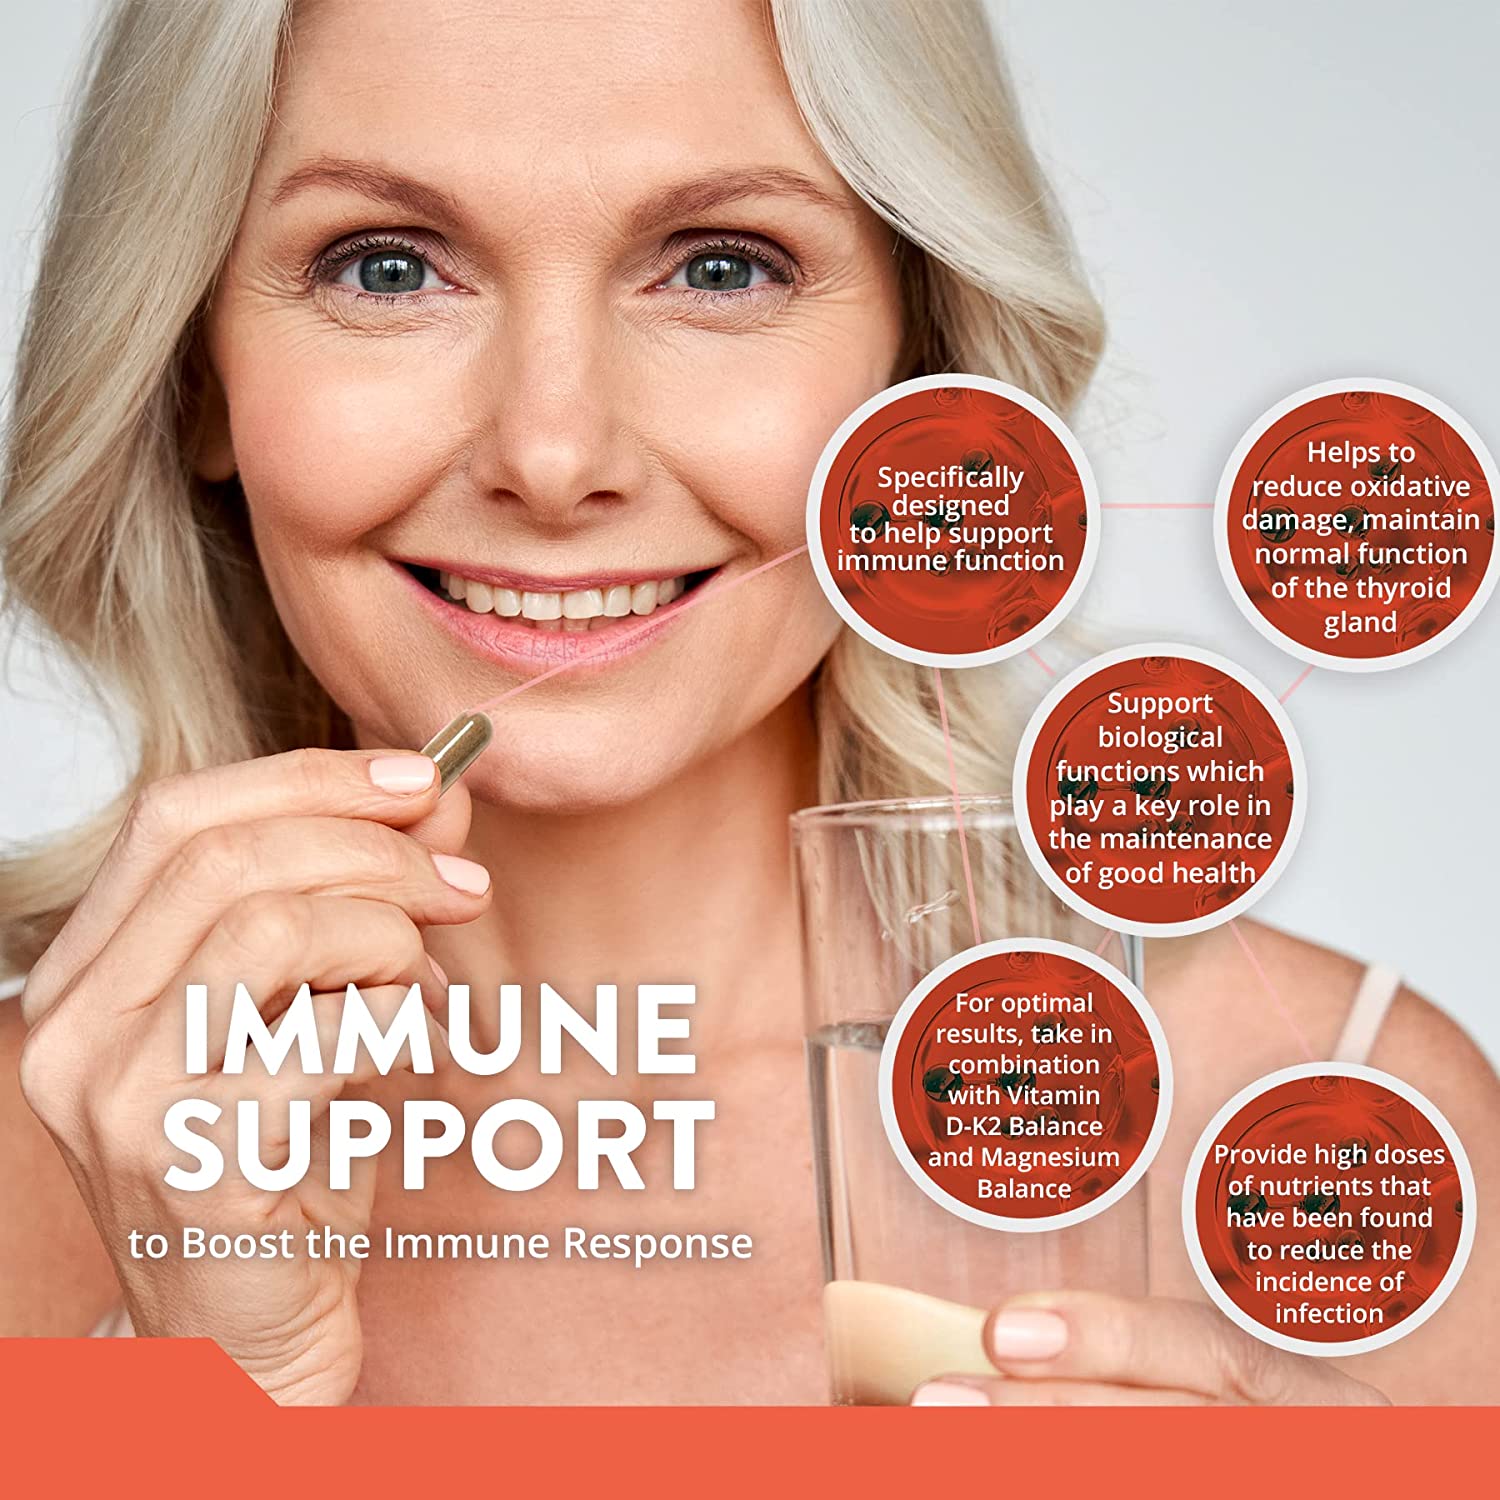 Immune Support to boost the immune response